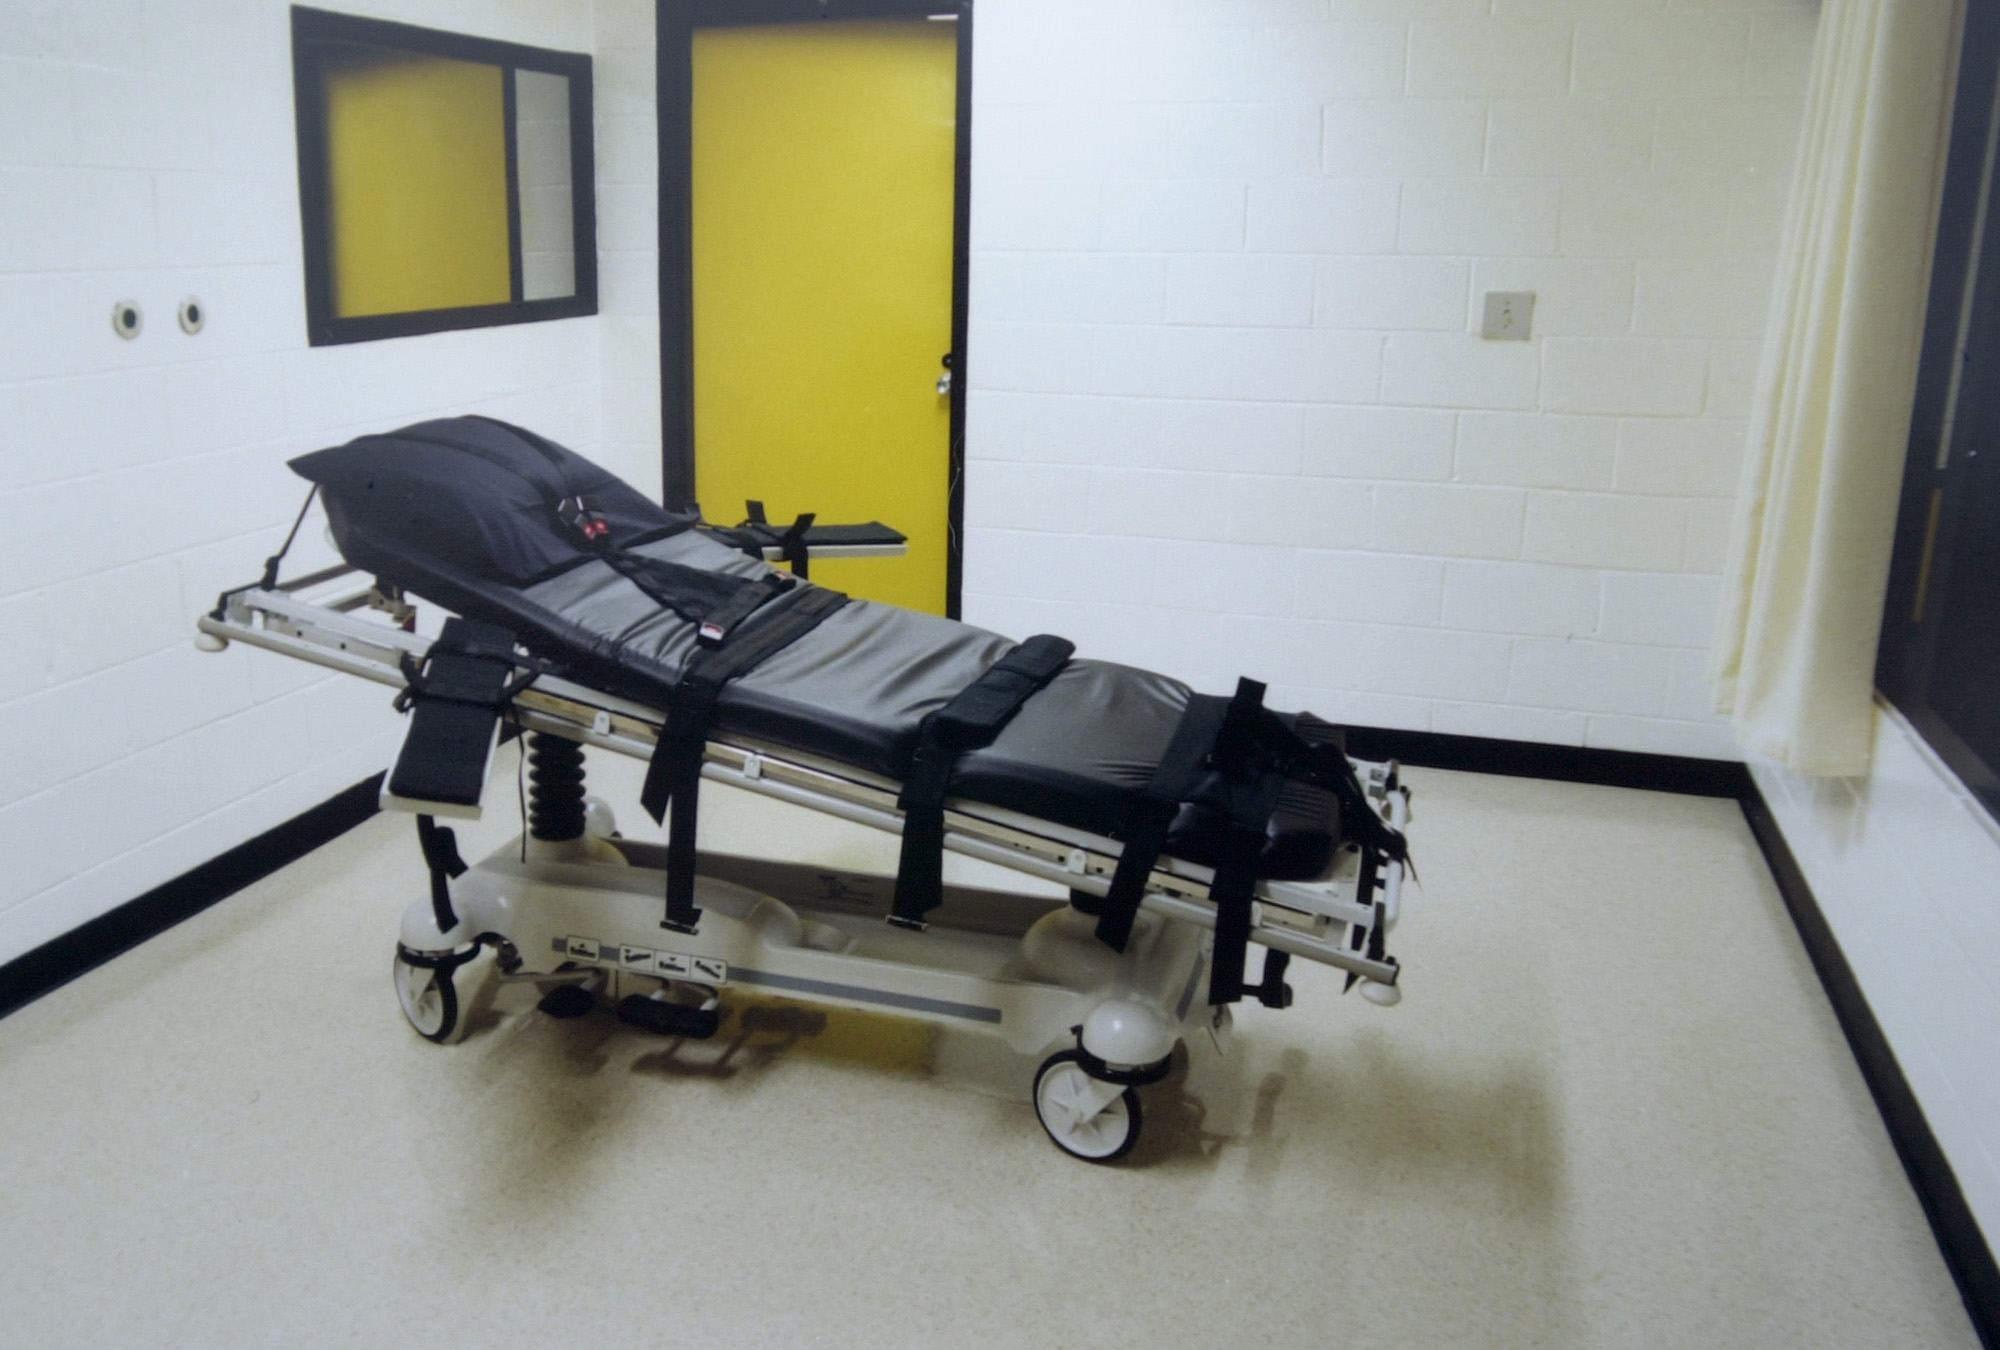 This undated photo shows the death chamber at the Georgia Diagnostic Prison in Jackson, GA. (Erik S. Lesser—Getty Images)